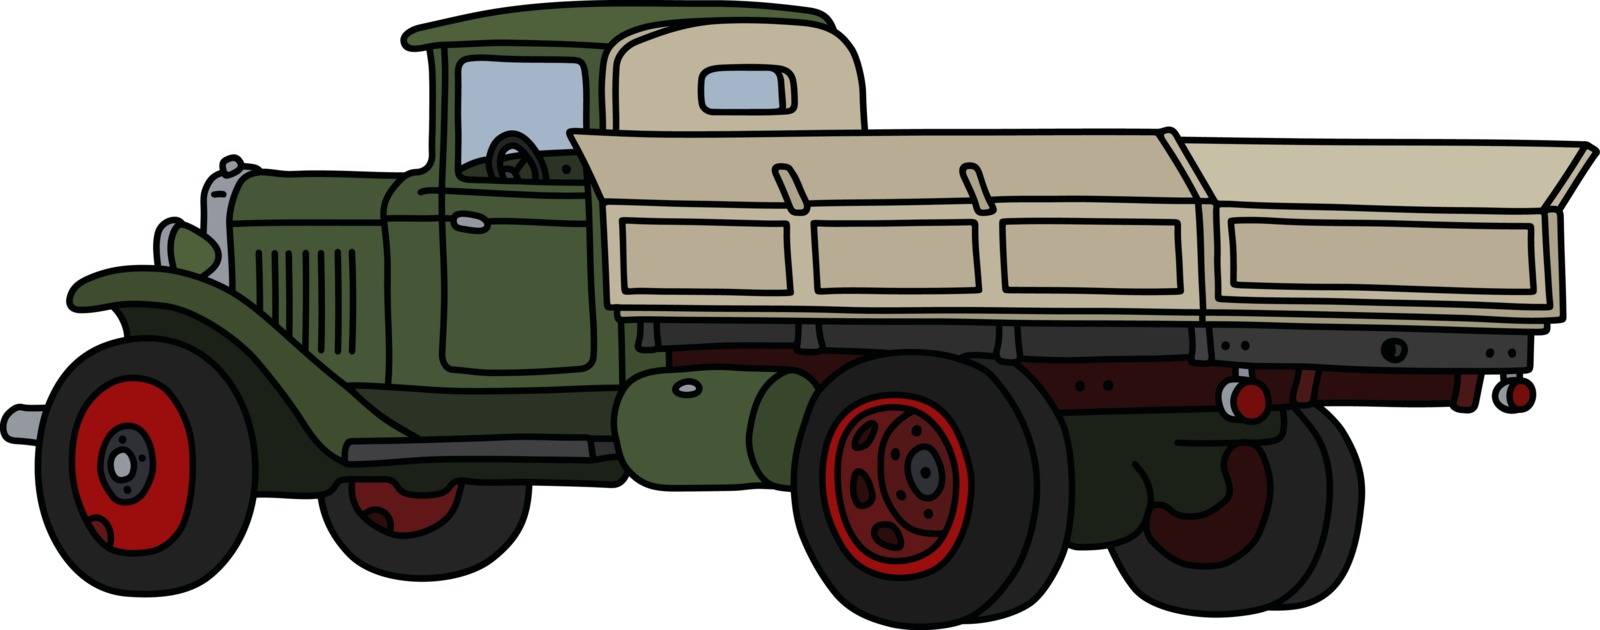 The classic green truck by vostal